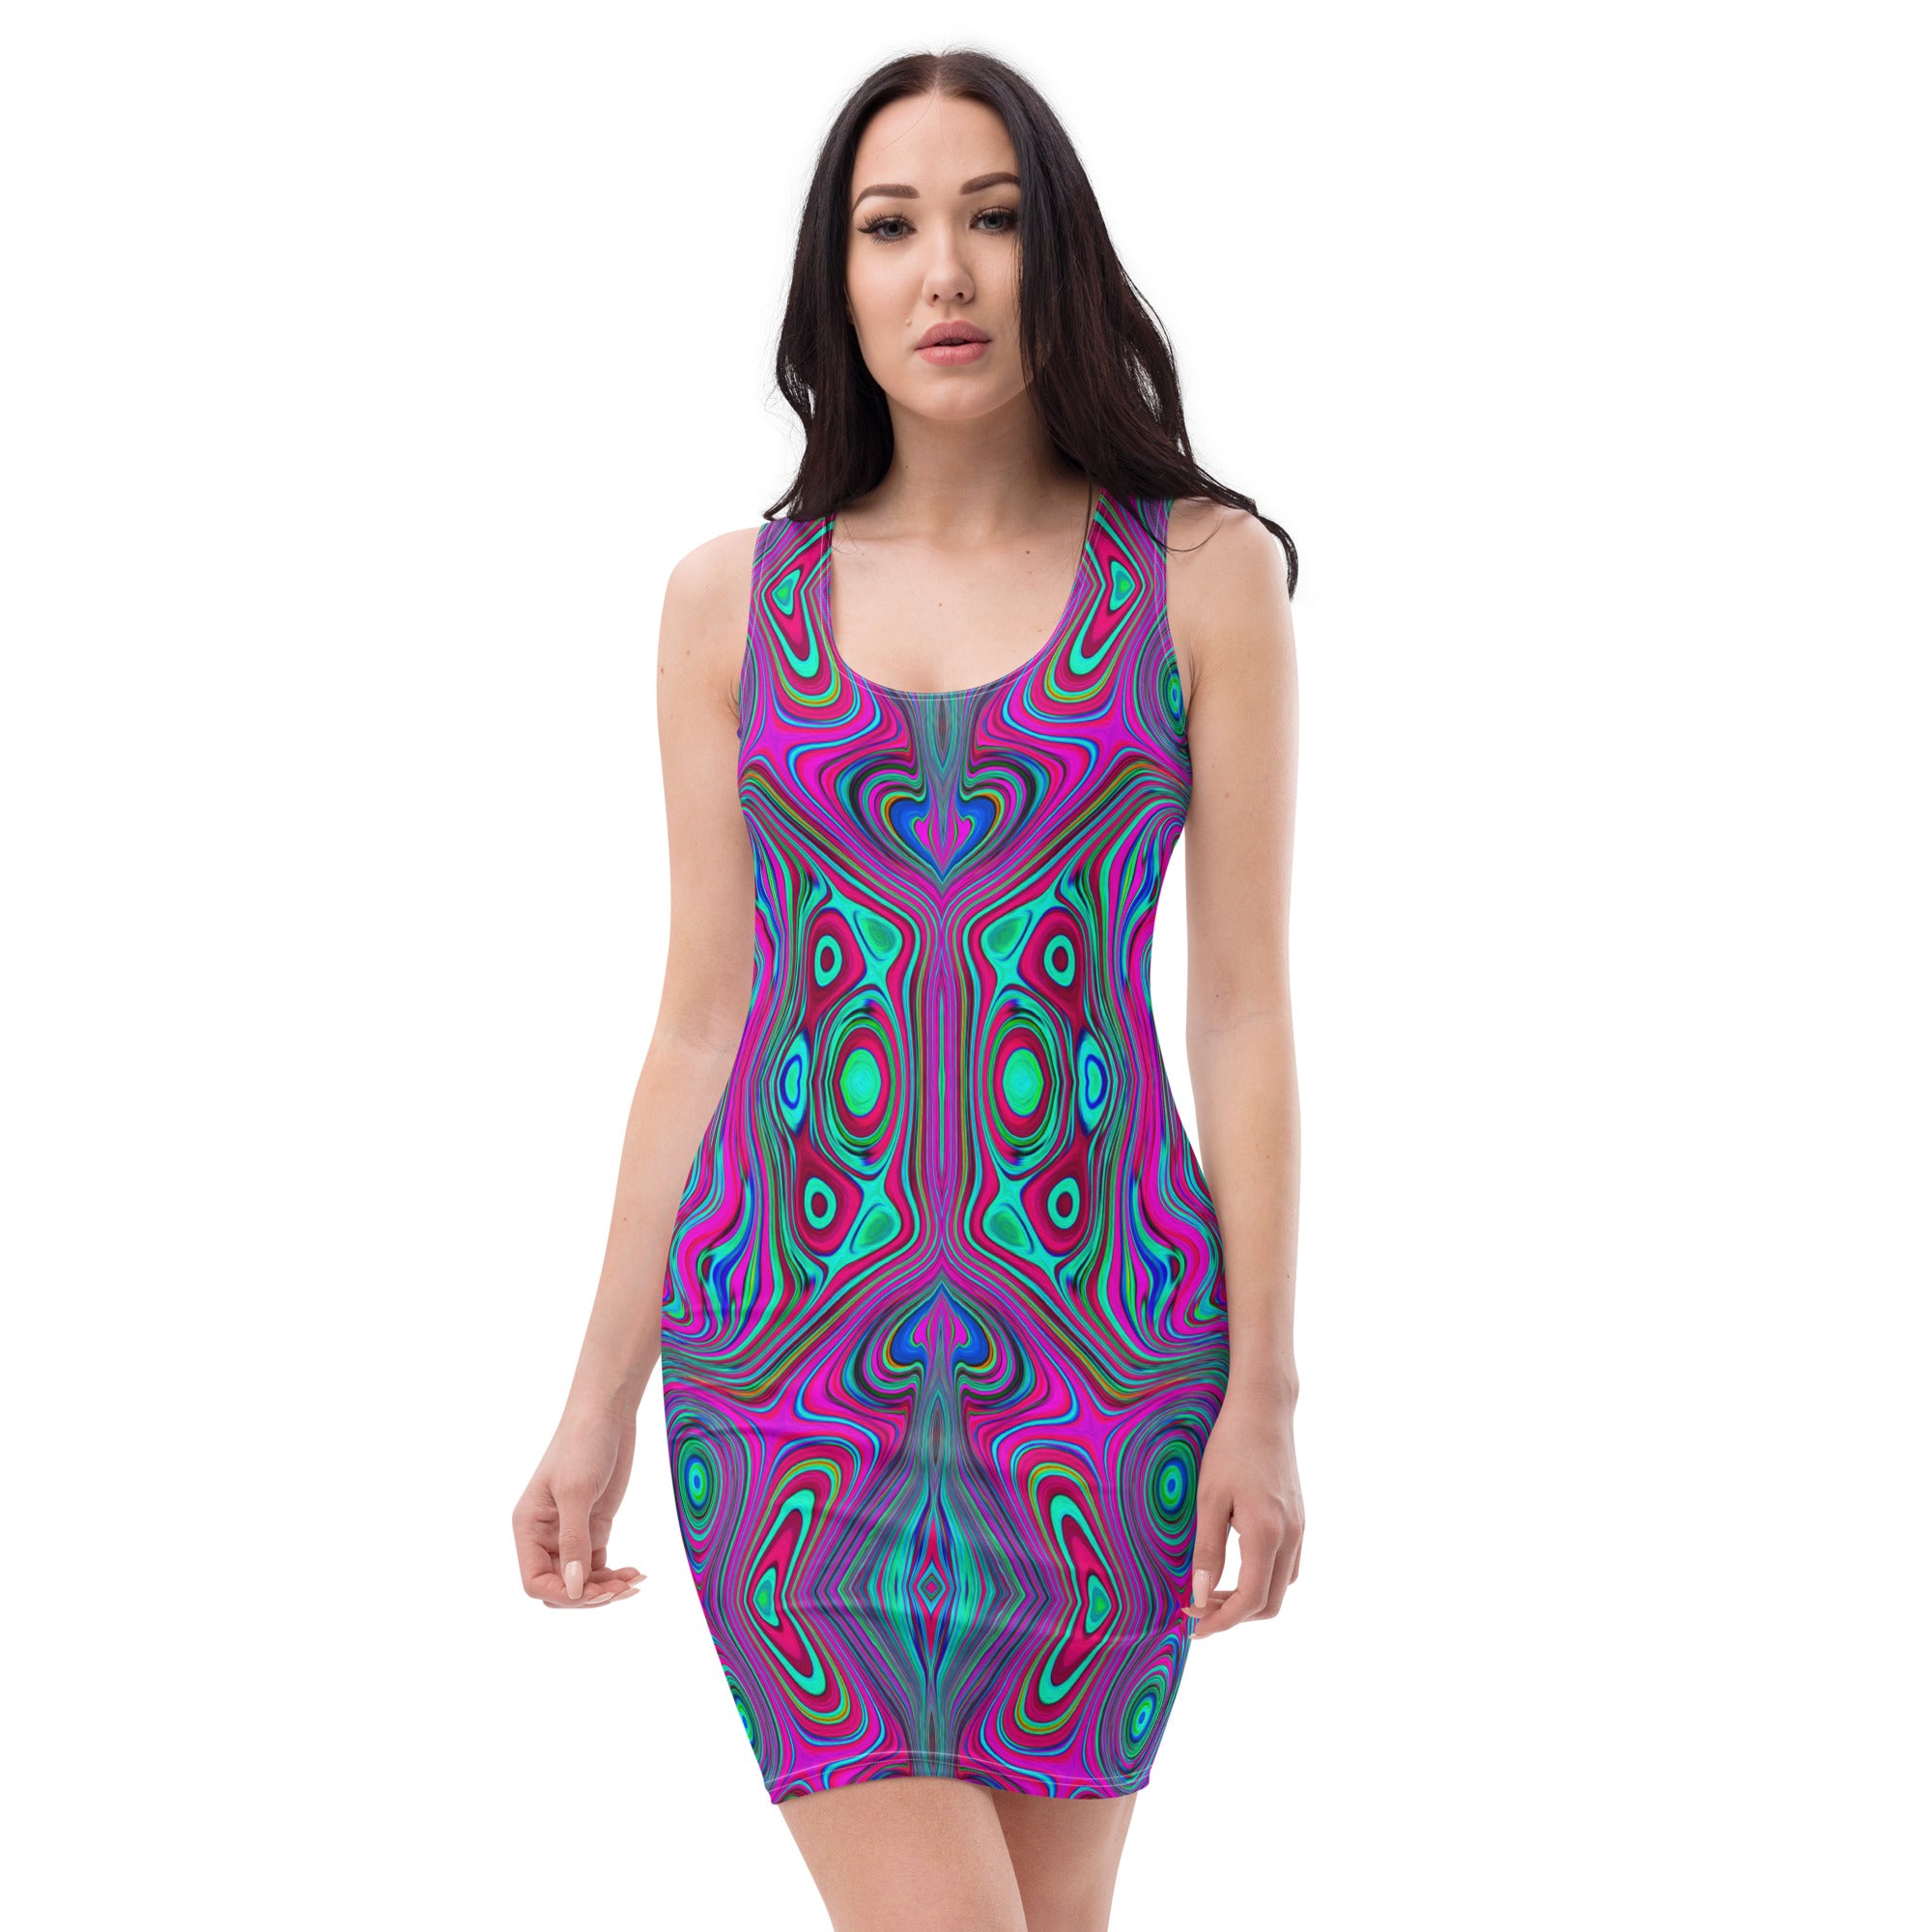 Bodycon Dress, Trippy Retro Magenta, Blue and Green Abstract